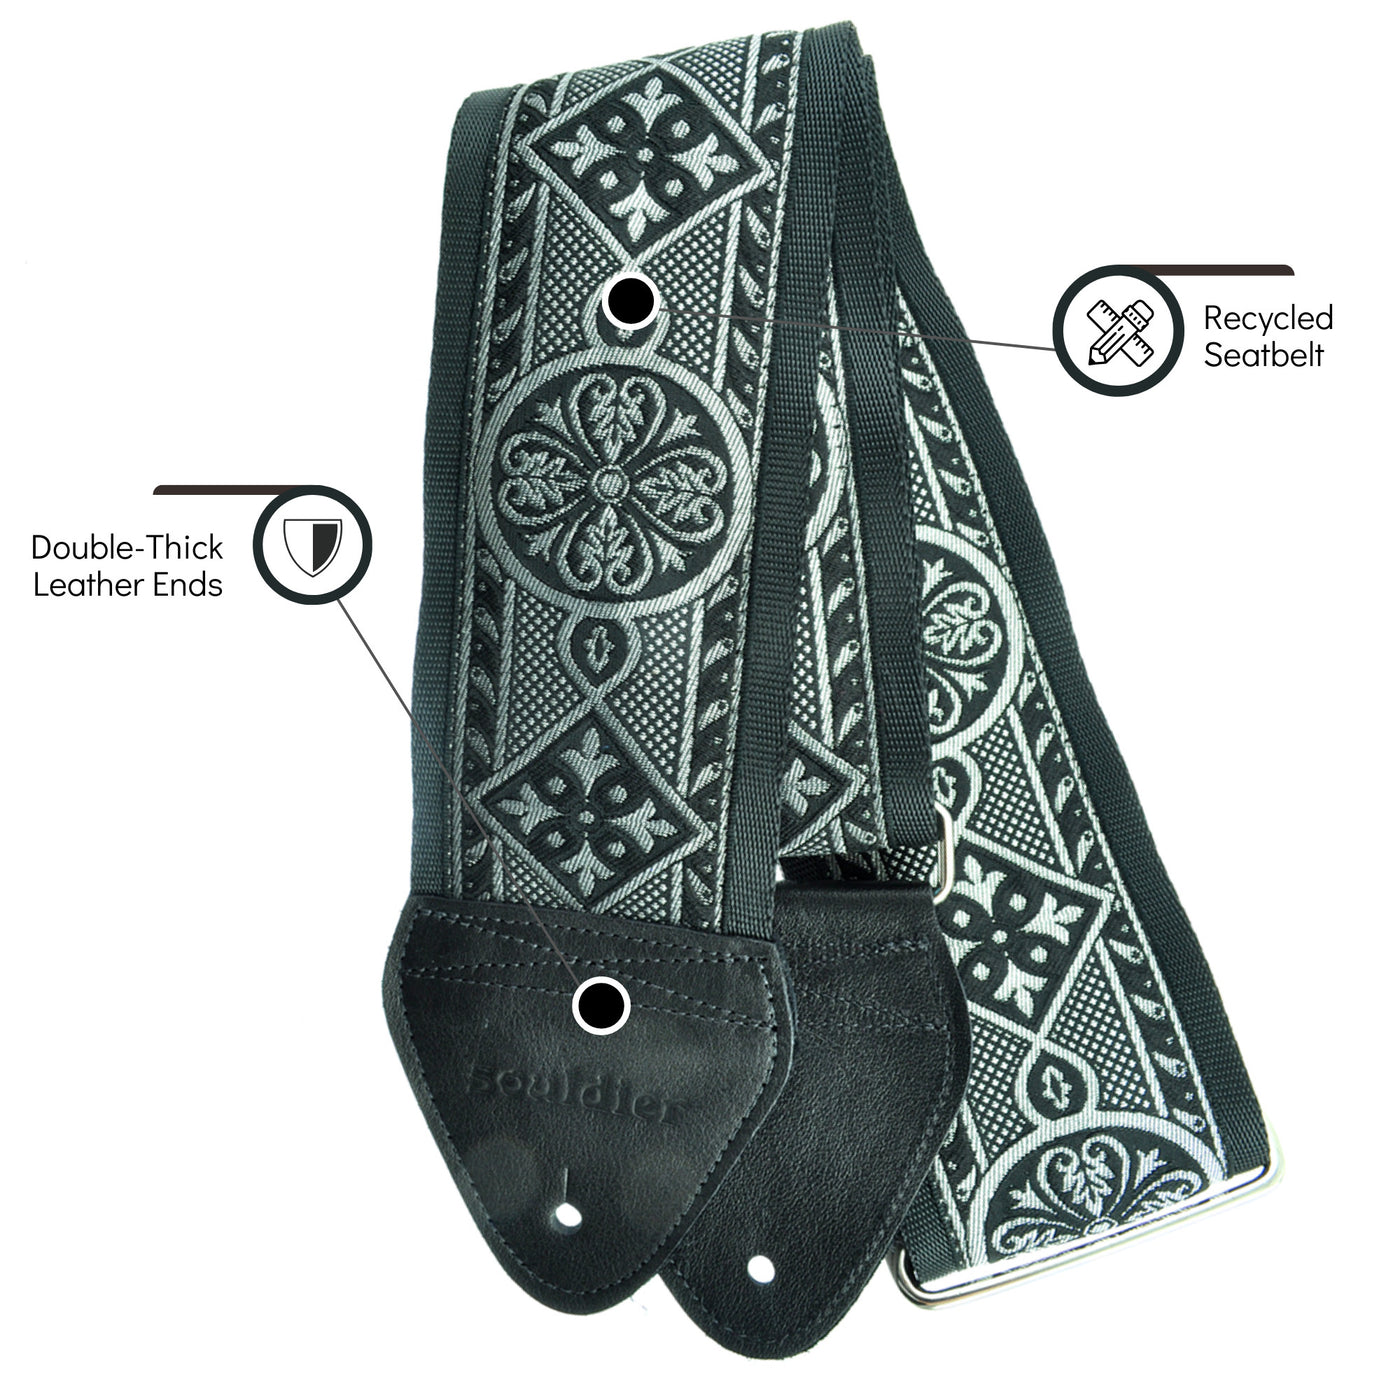 Souldier GT0052BK02BK - Handmade Souldier Fabric Bass Strap, 3 Inches Wide and Adjustable from 33" to 60" Made in the USA, Black